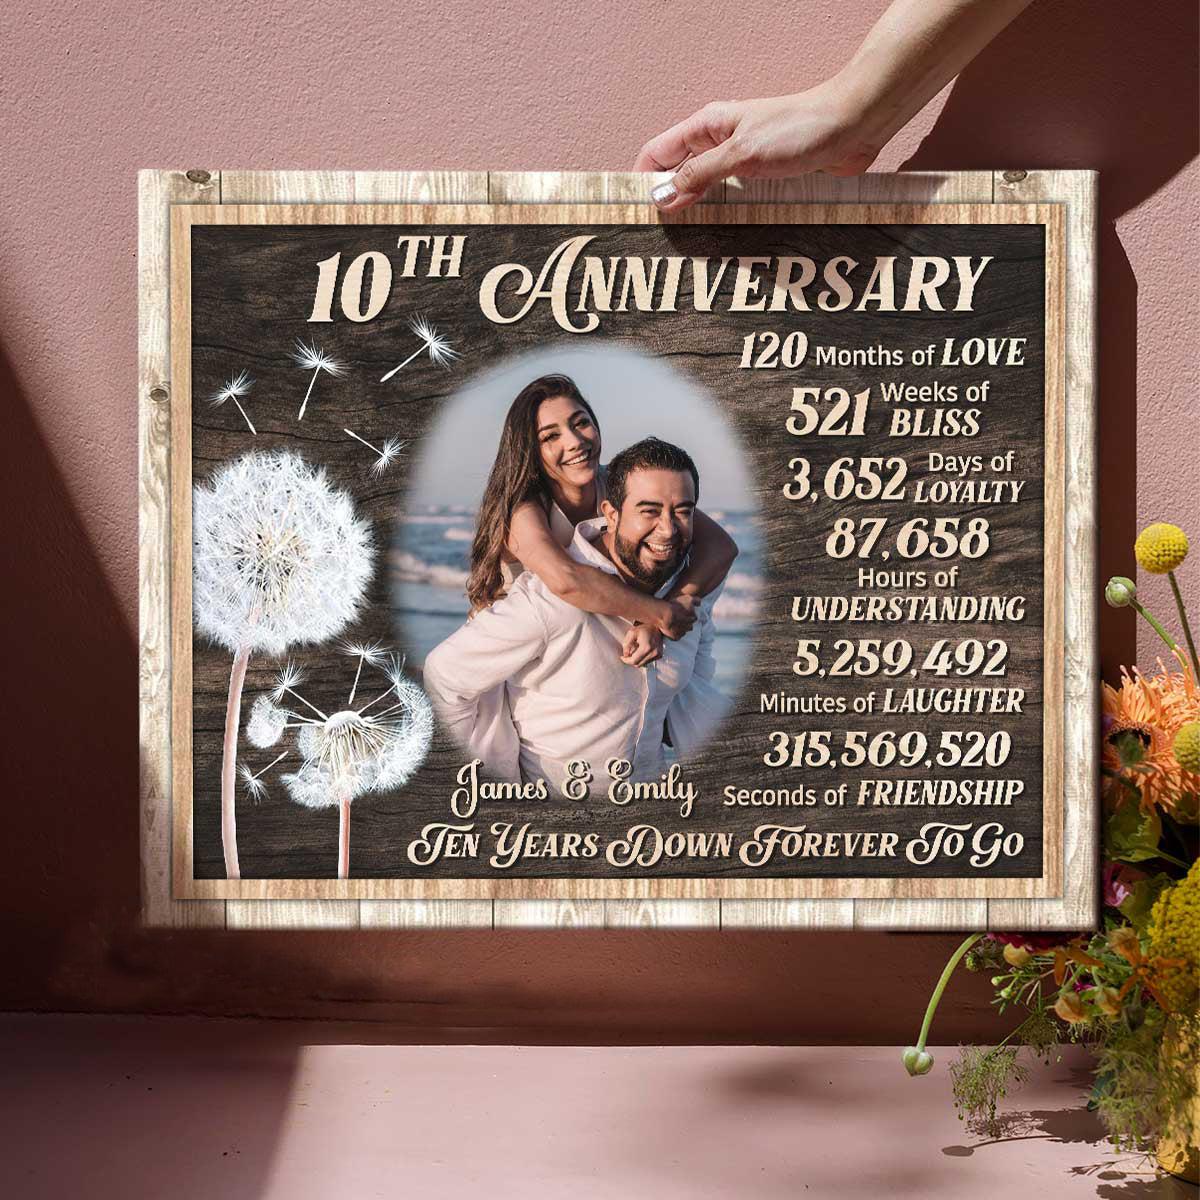 Buy Custom 25th Anniversary Gifts for Couples Online India – Nutcase